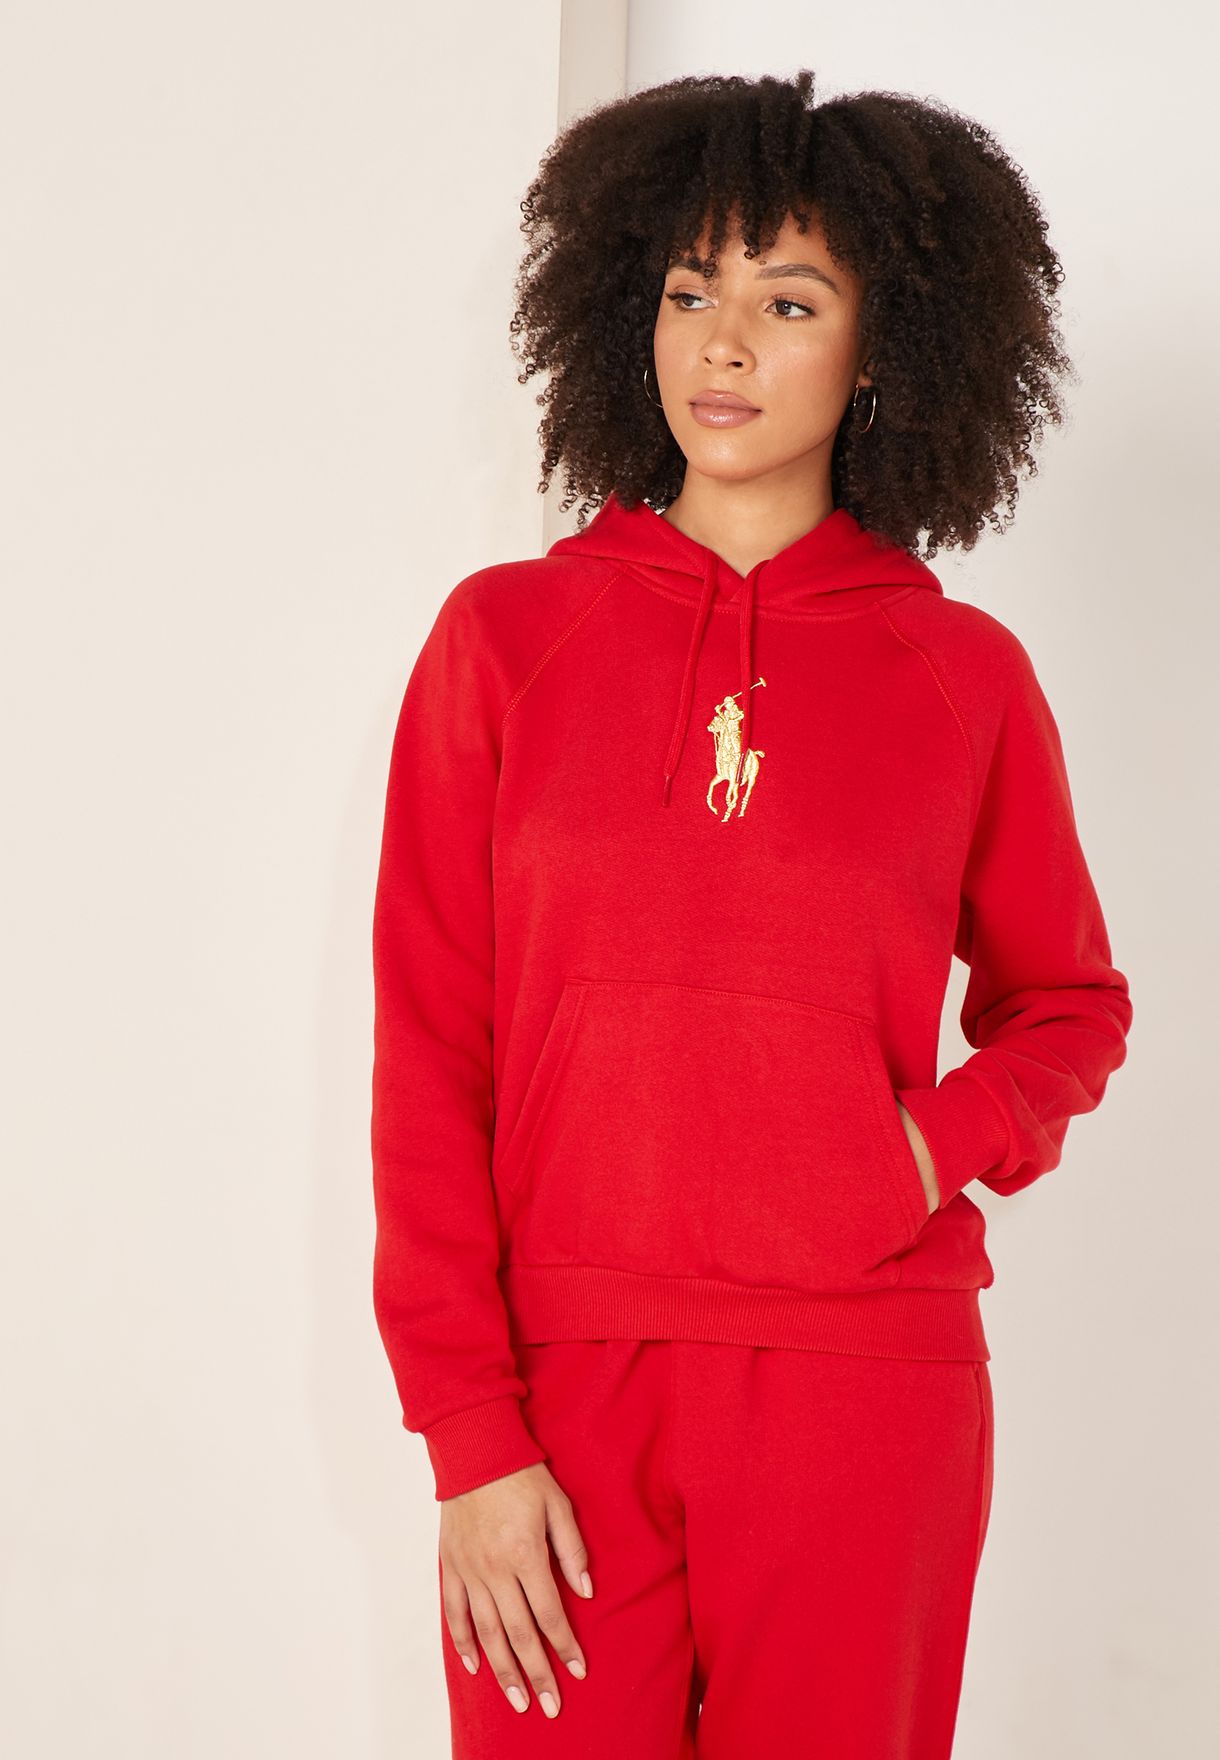 red polo hoodie women's - 60% OFF 